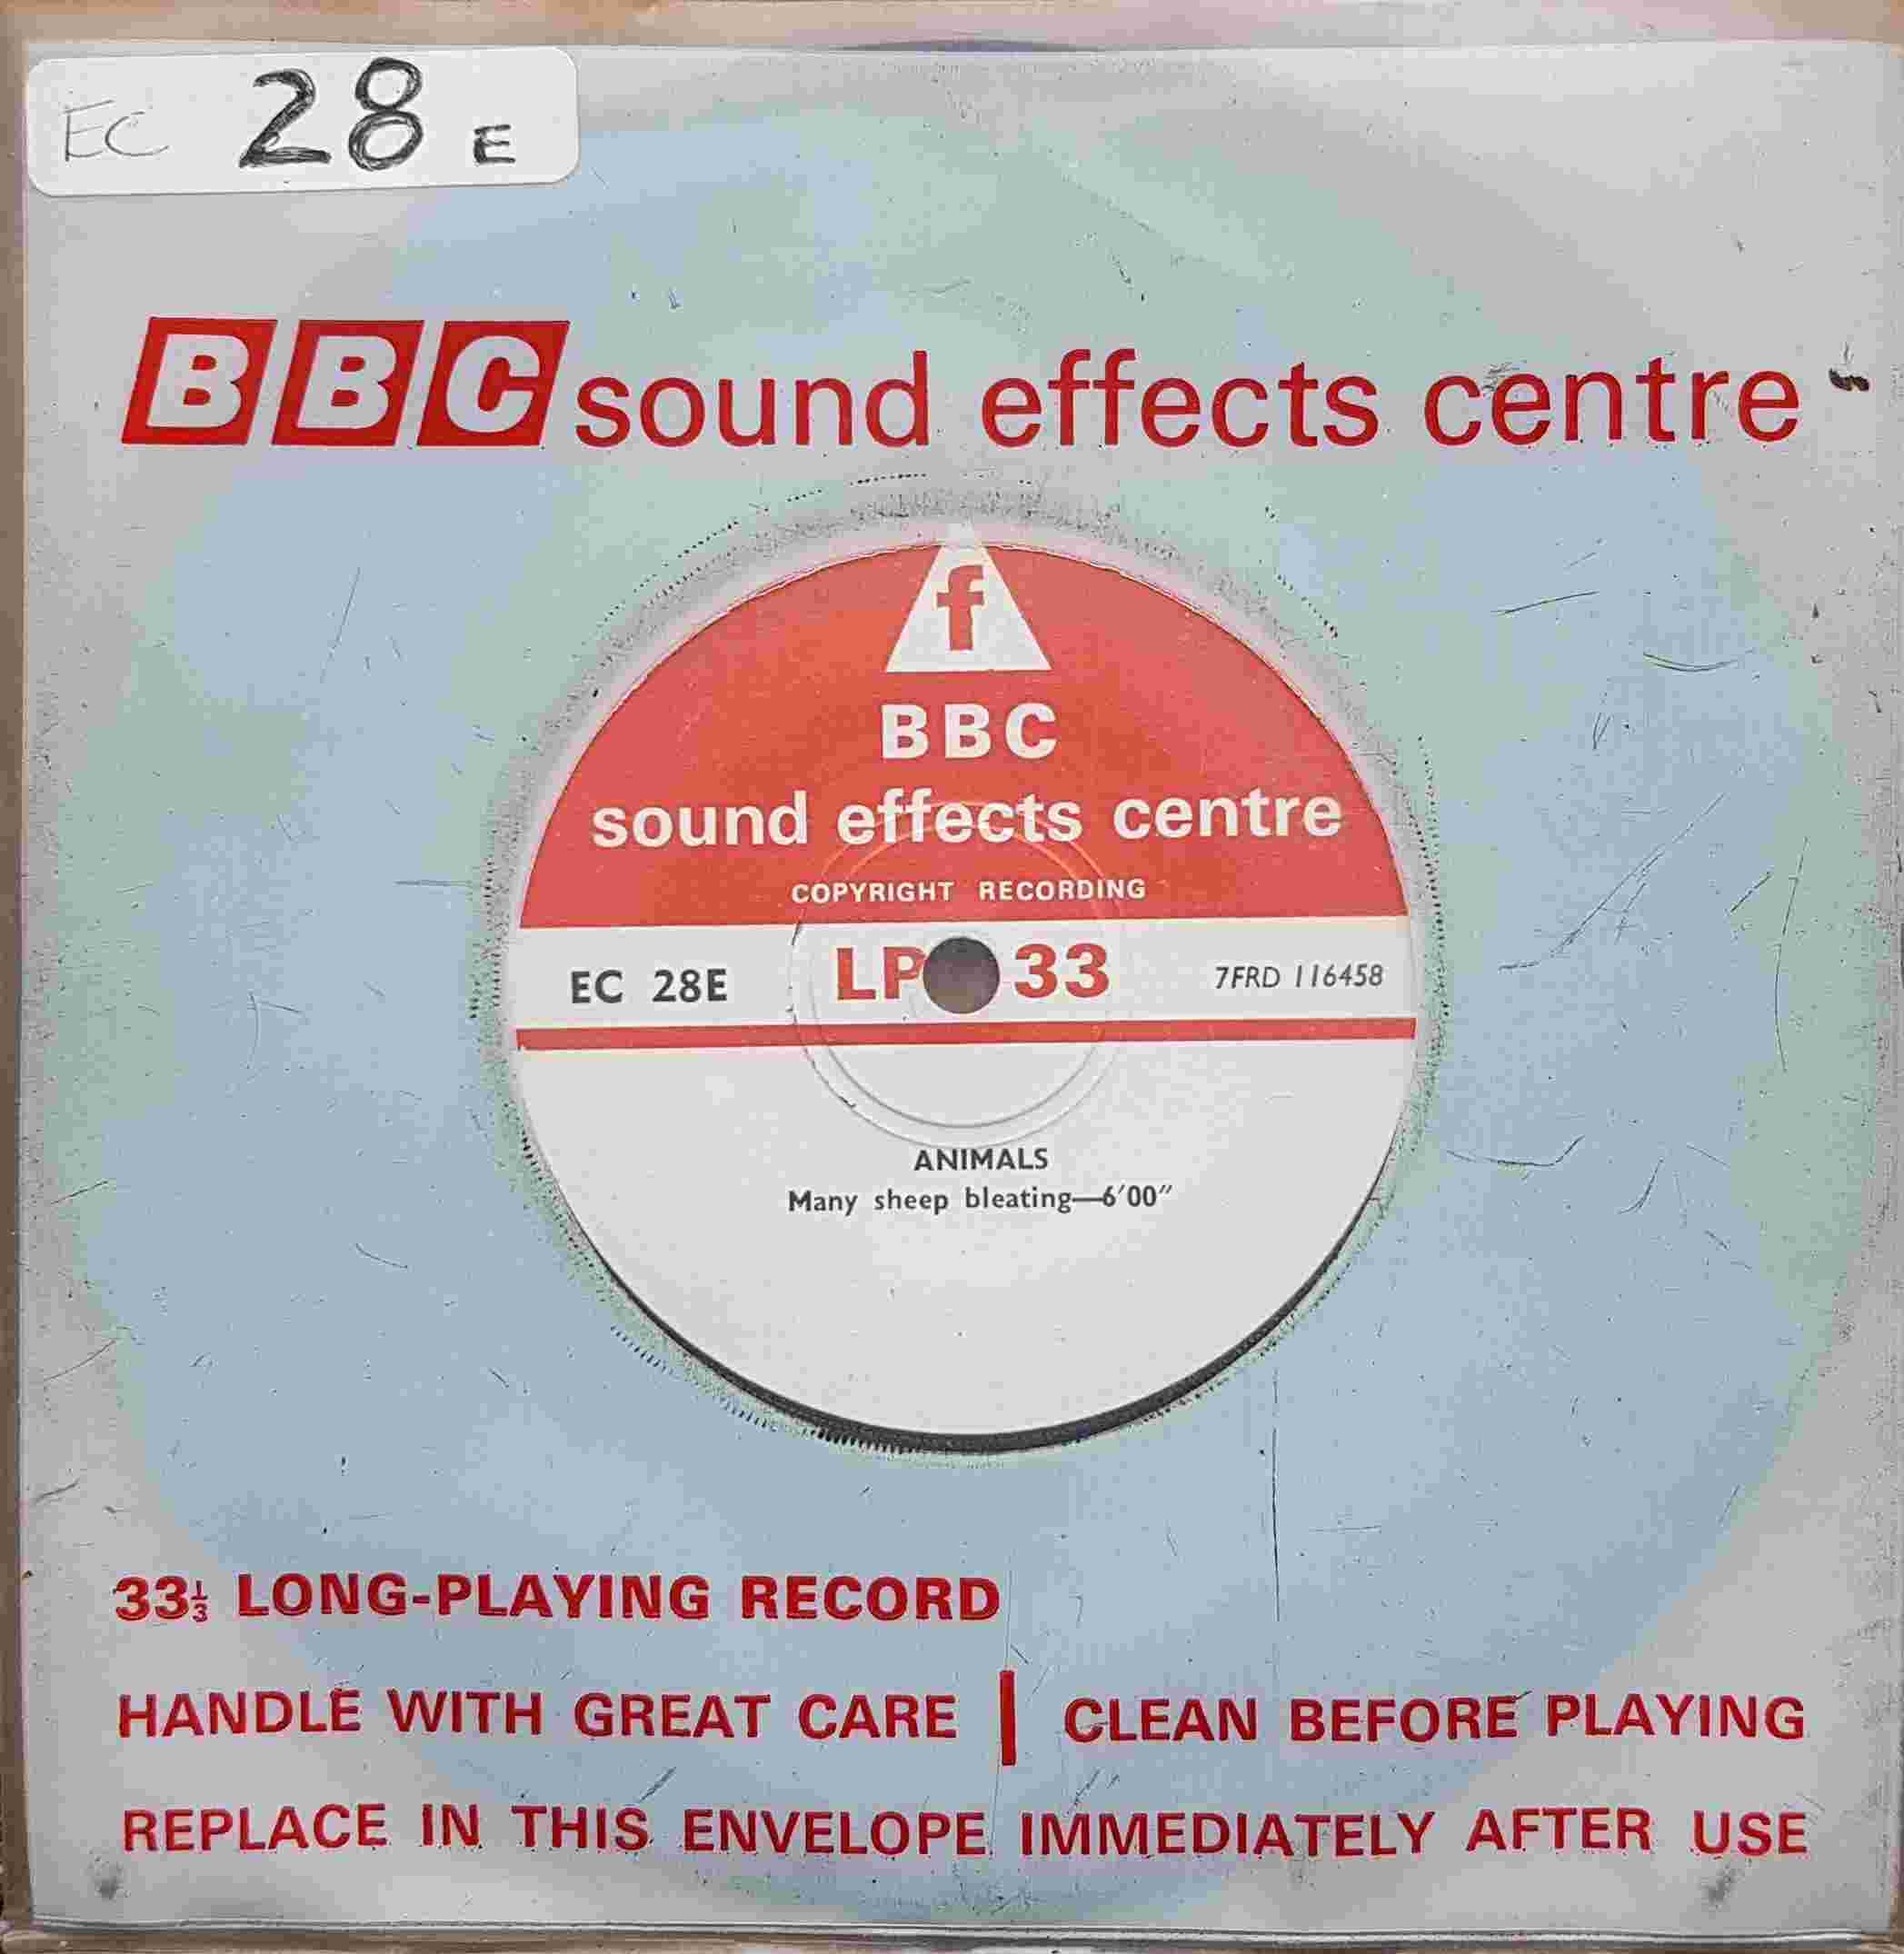 Picture of EC 28E Animals by artist Not registered from the BBC singles - Records and Tapes library